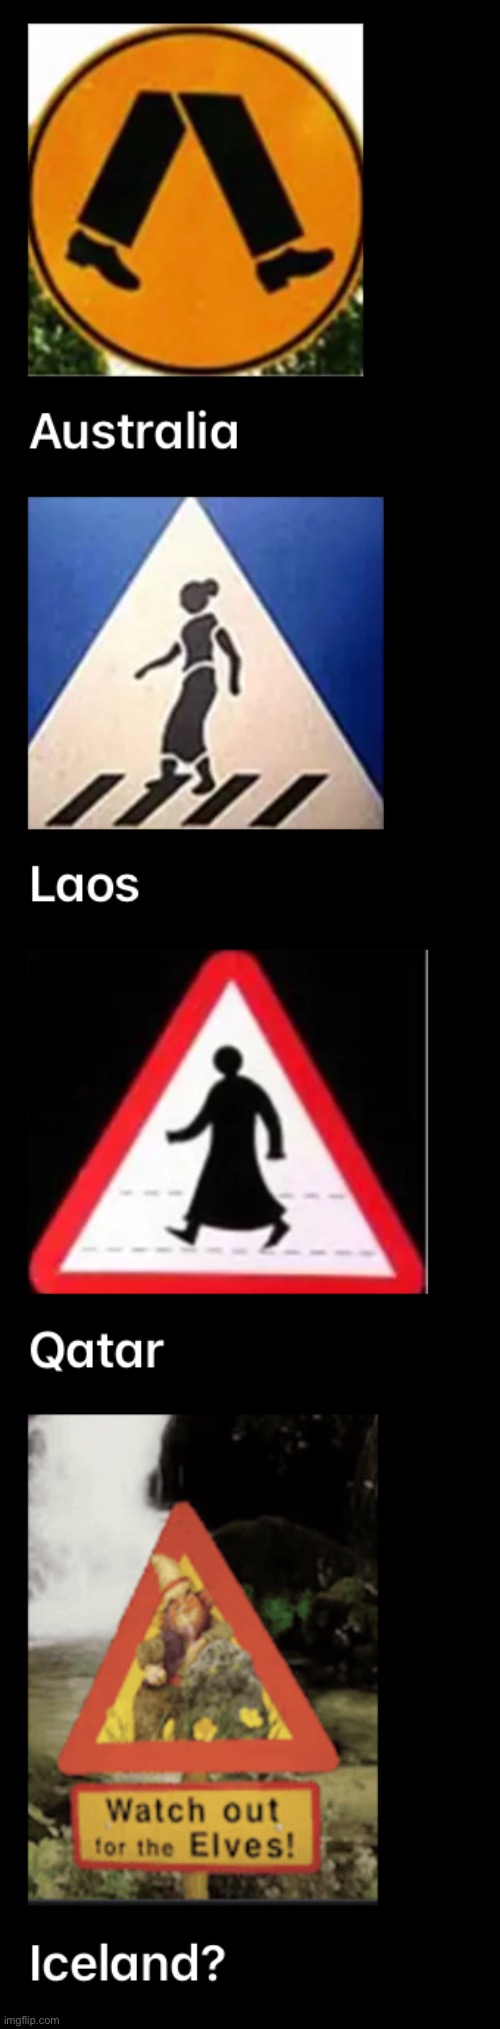 Road signs | image tagged in signs/billboards | made w/ Imgflip meme maker